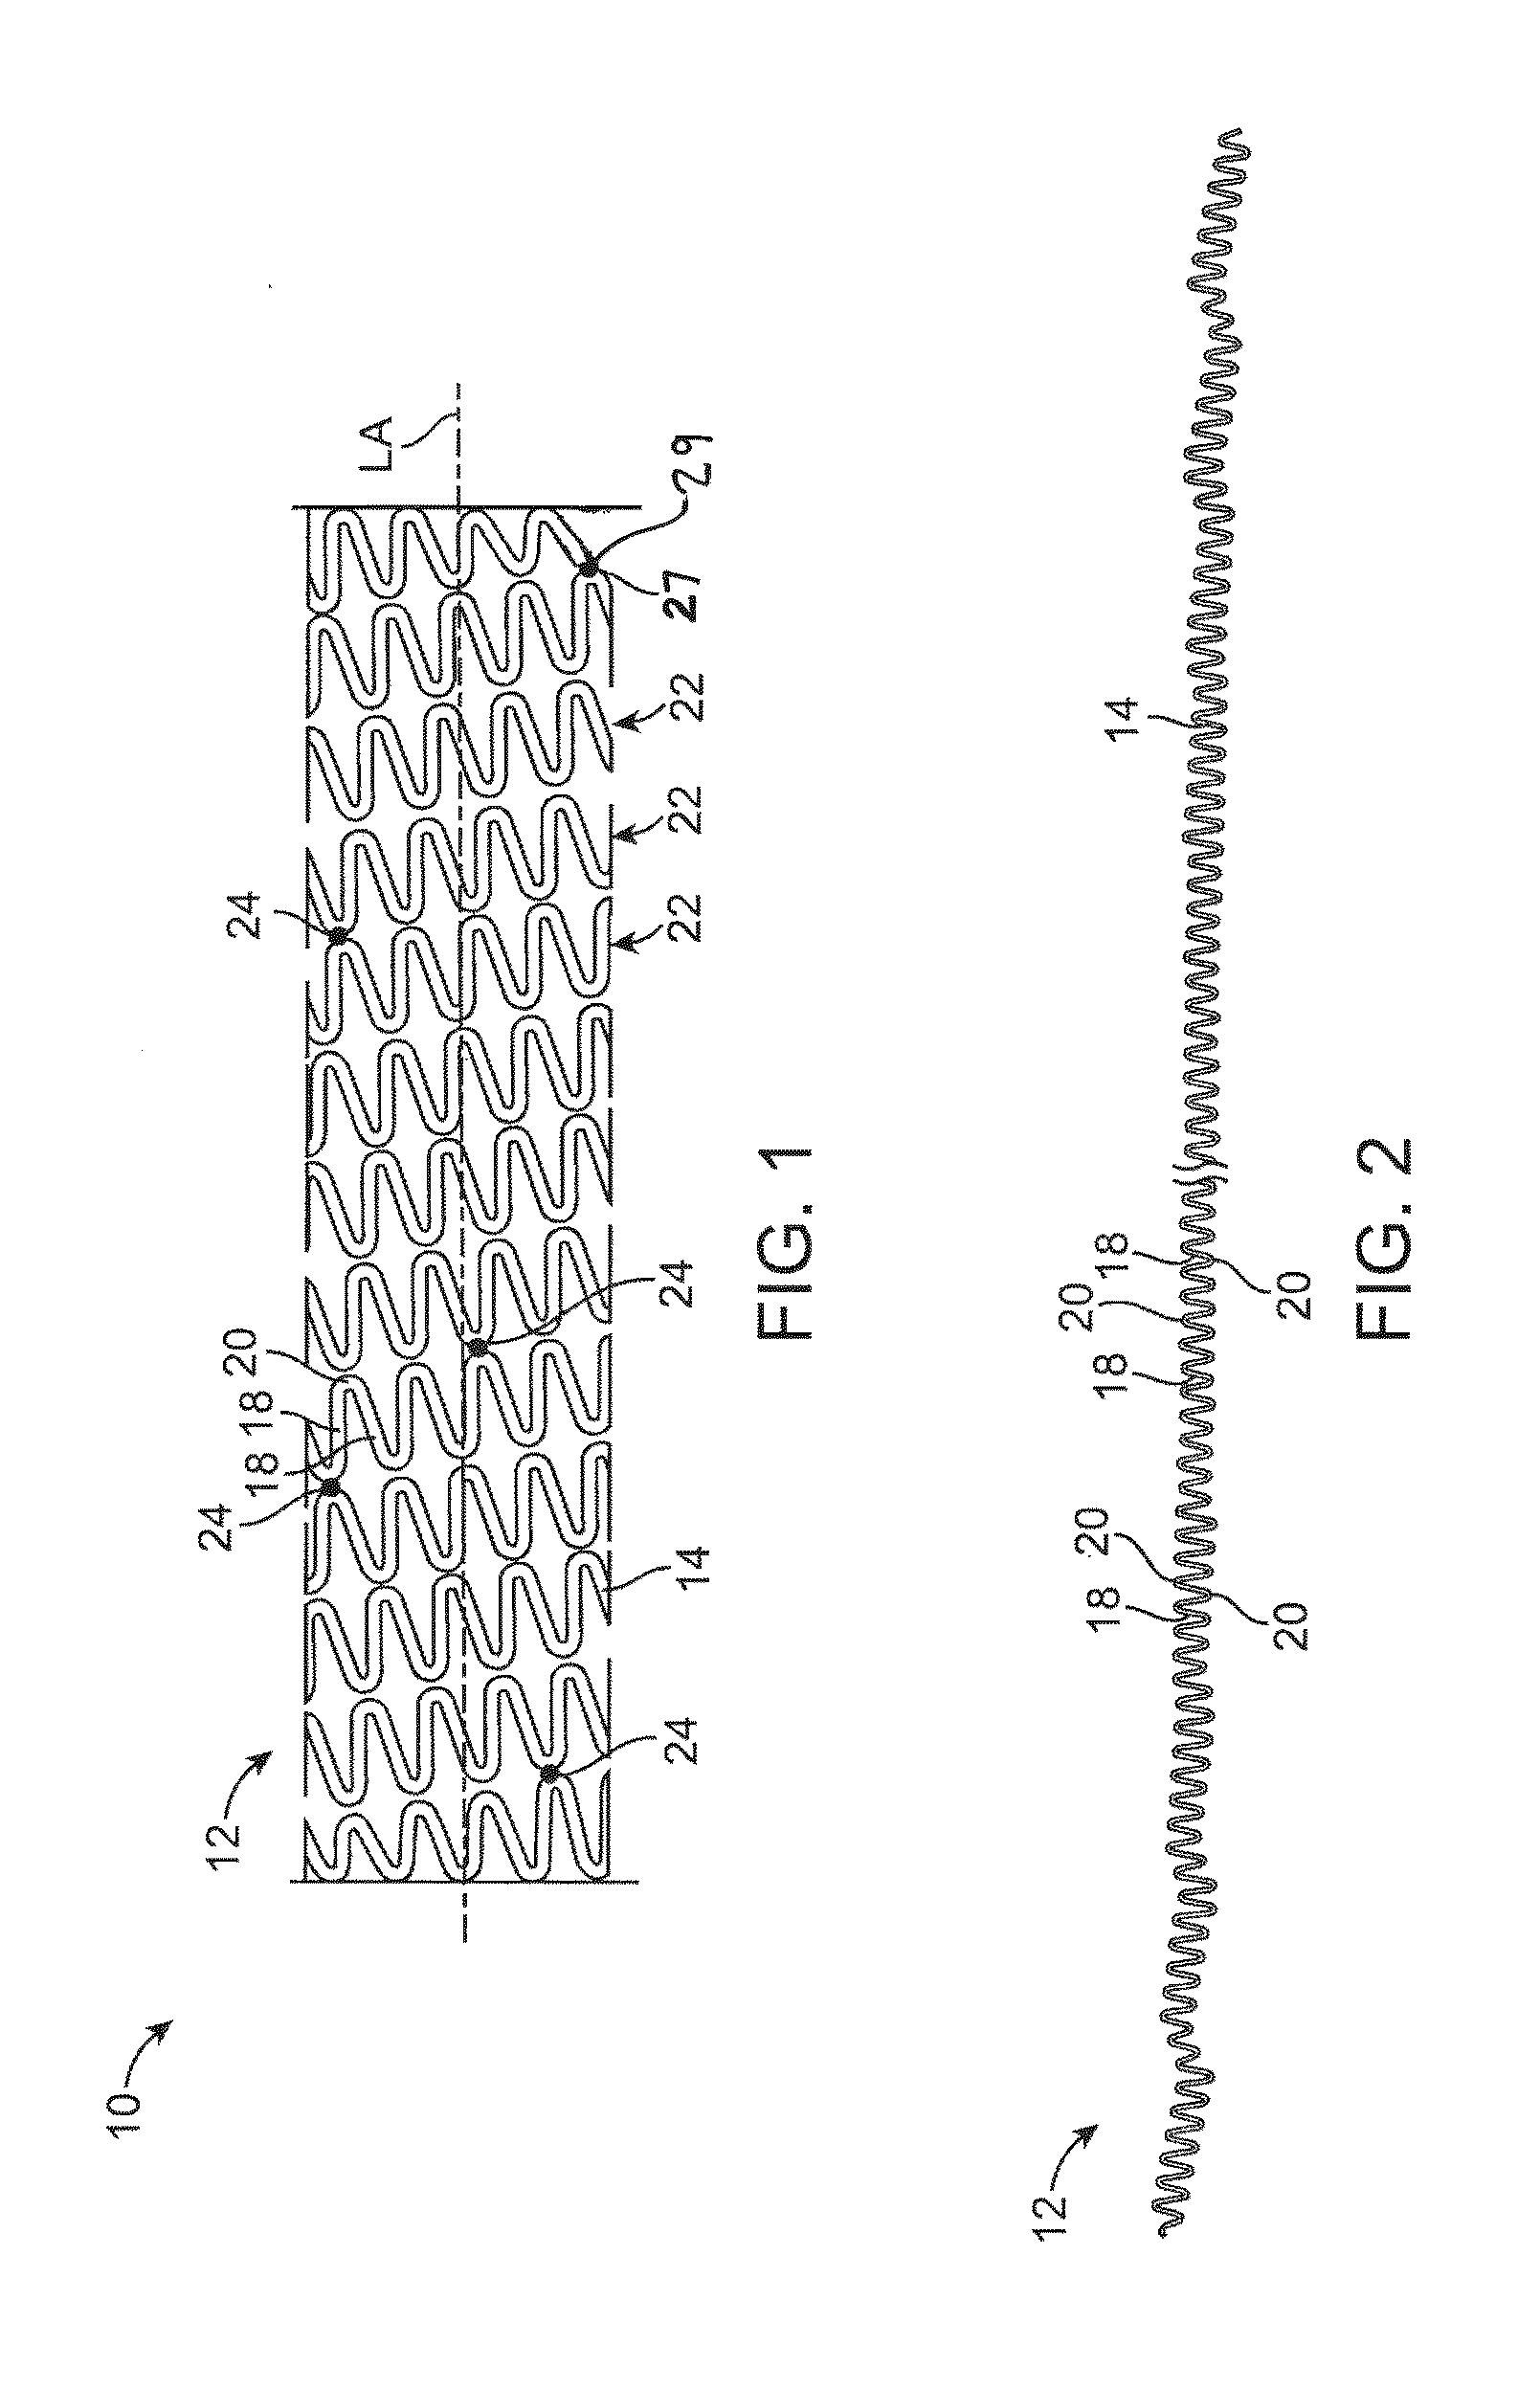 Method for forming a stent